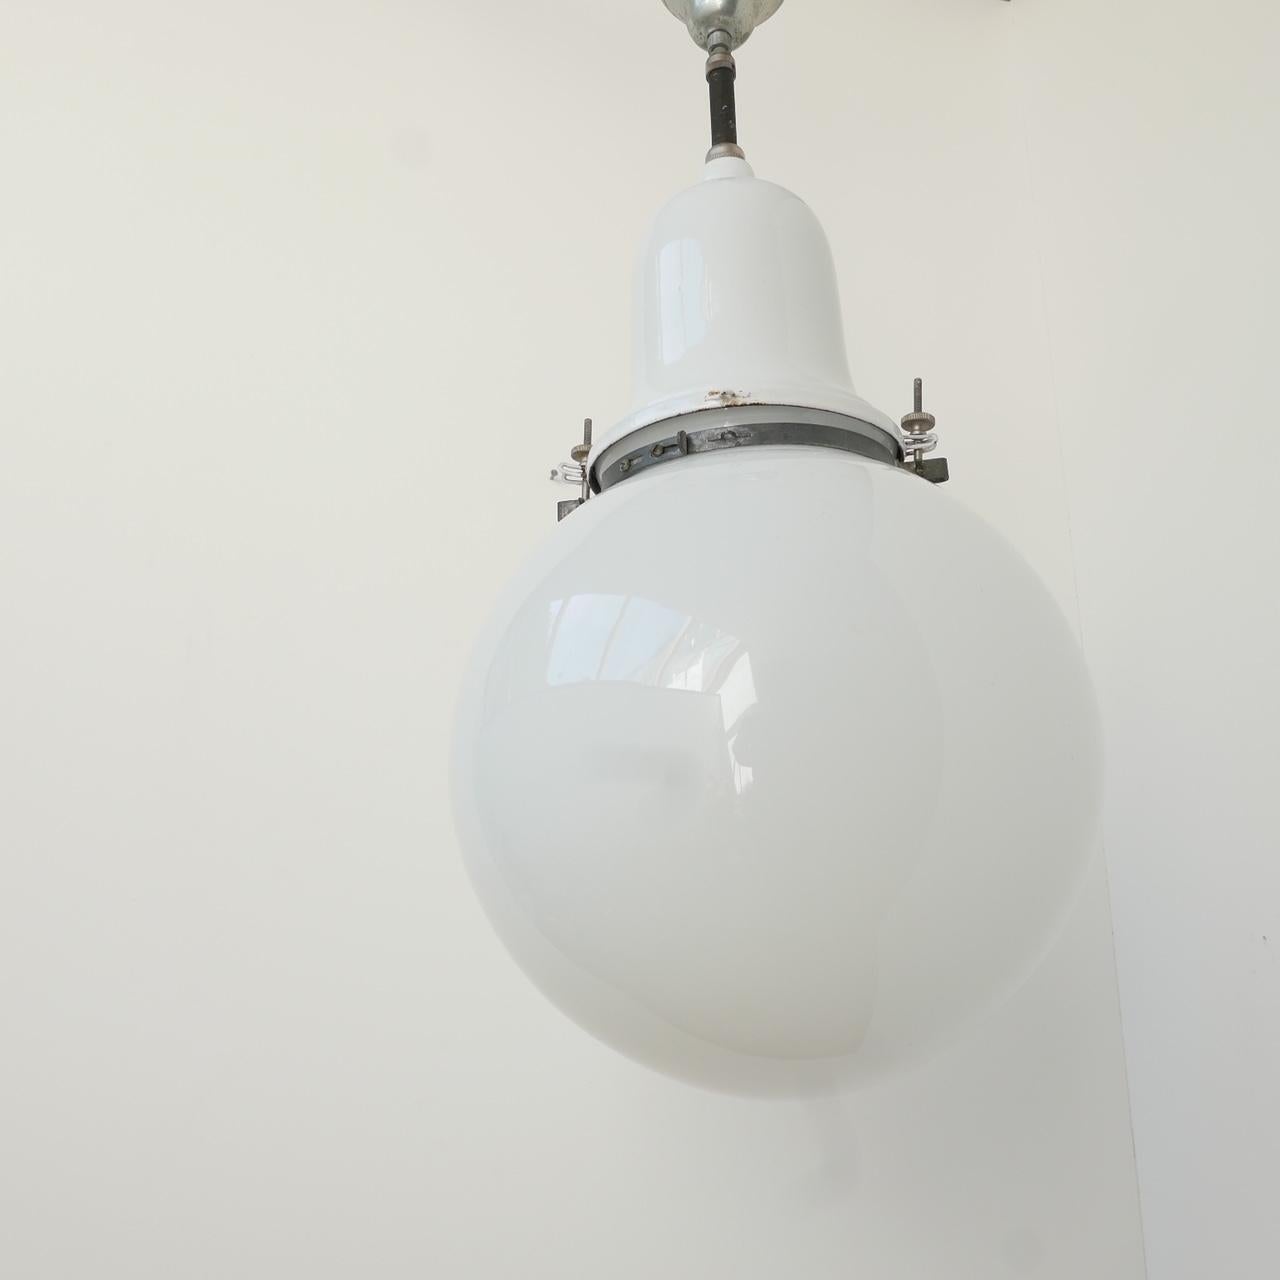 A large opaline globe pendant light, enamel and metal gallery. 

Swedish, early 20th century. 

Re-wired and PAT tested. 

Dimensions: approximately 72 total height x 35 diameter in cm.